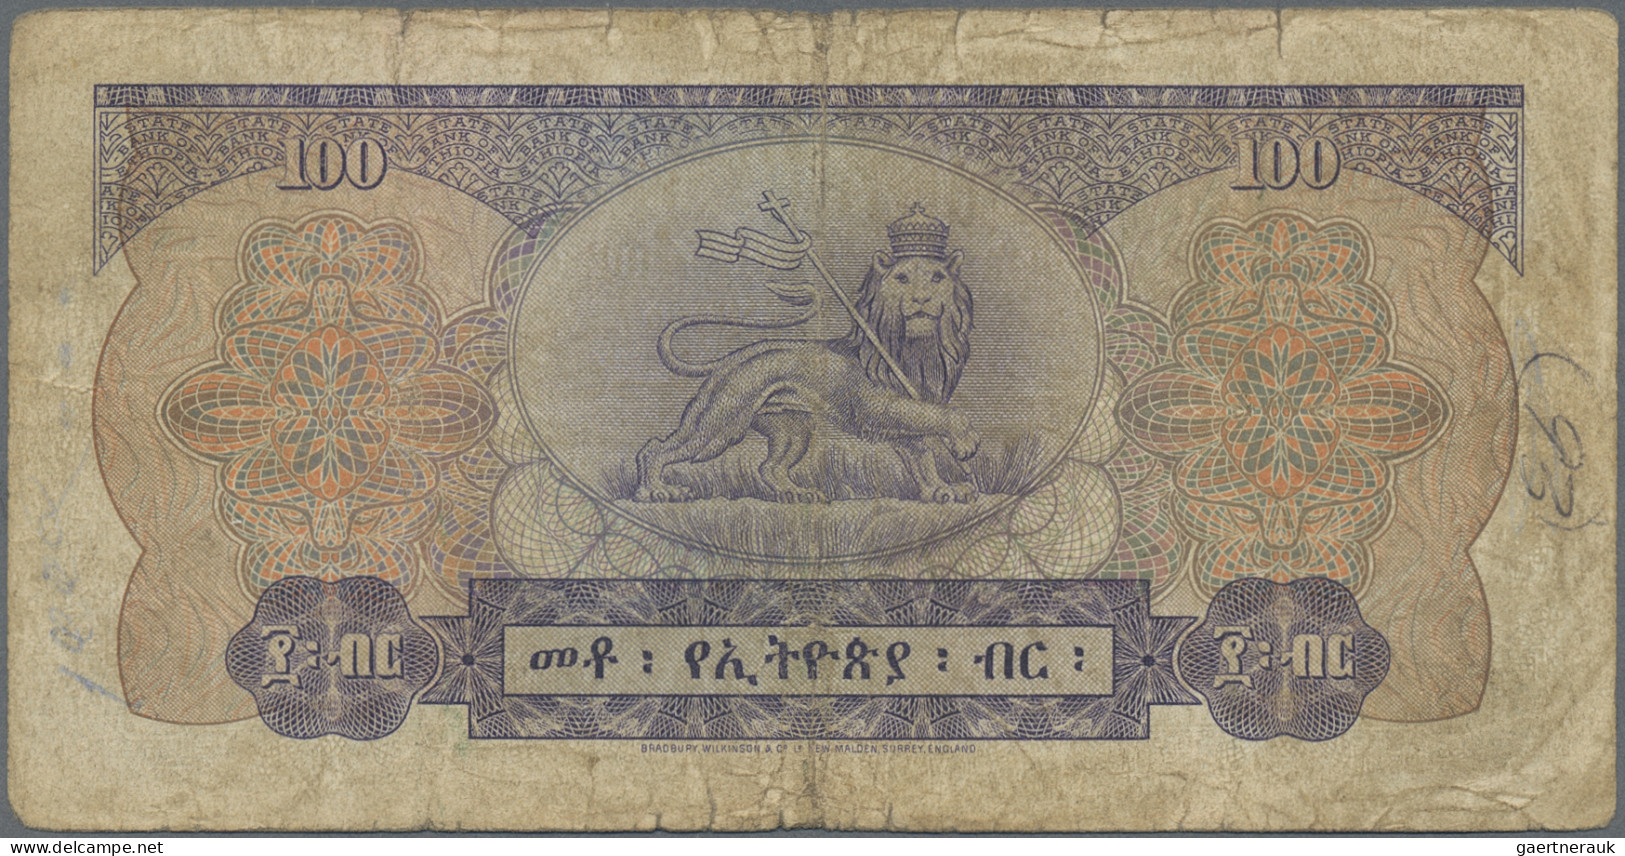 Ethiopia: State Bank of Ethiopia, set with 5 banknotes, series 1961/66, with 100